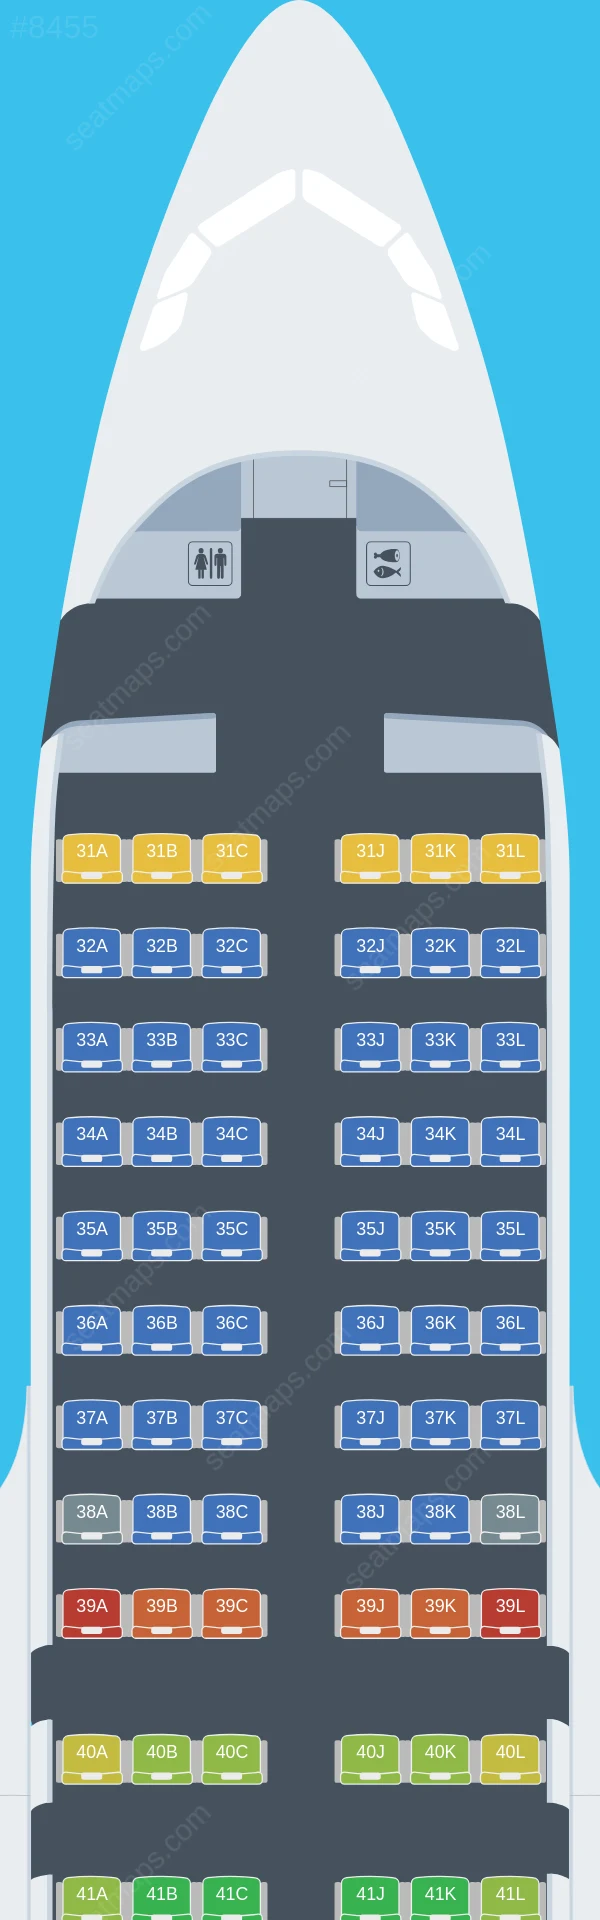 Cambodia Airways Airbus A319-100 seatmap preview